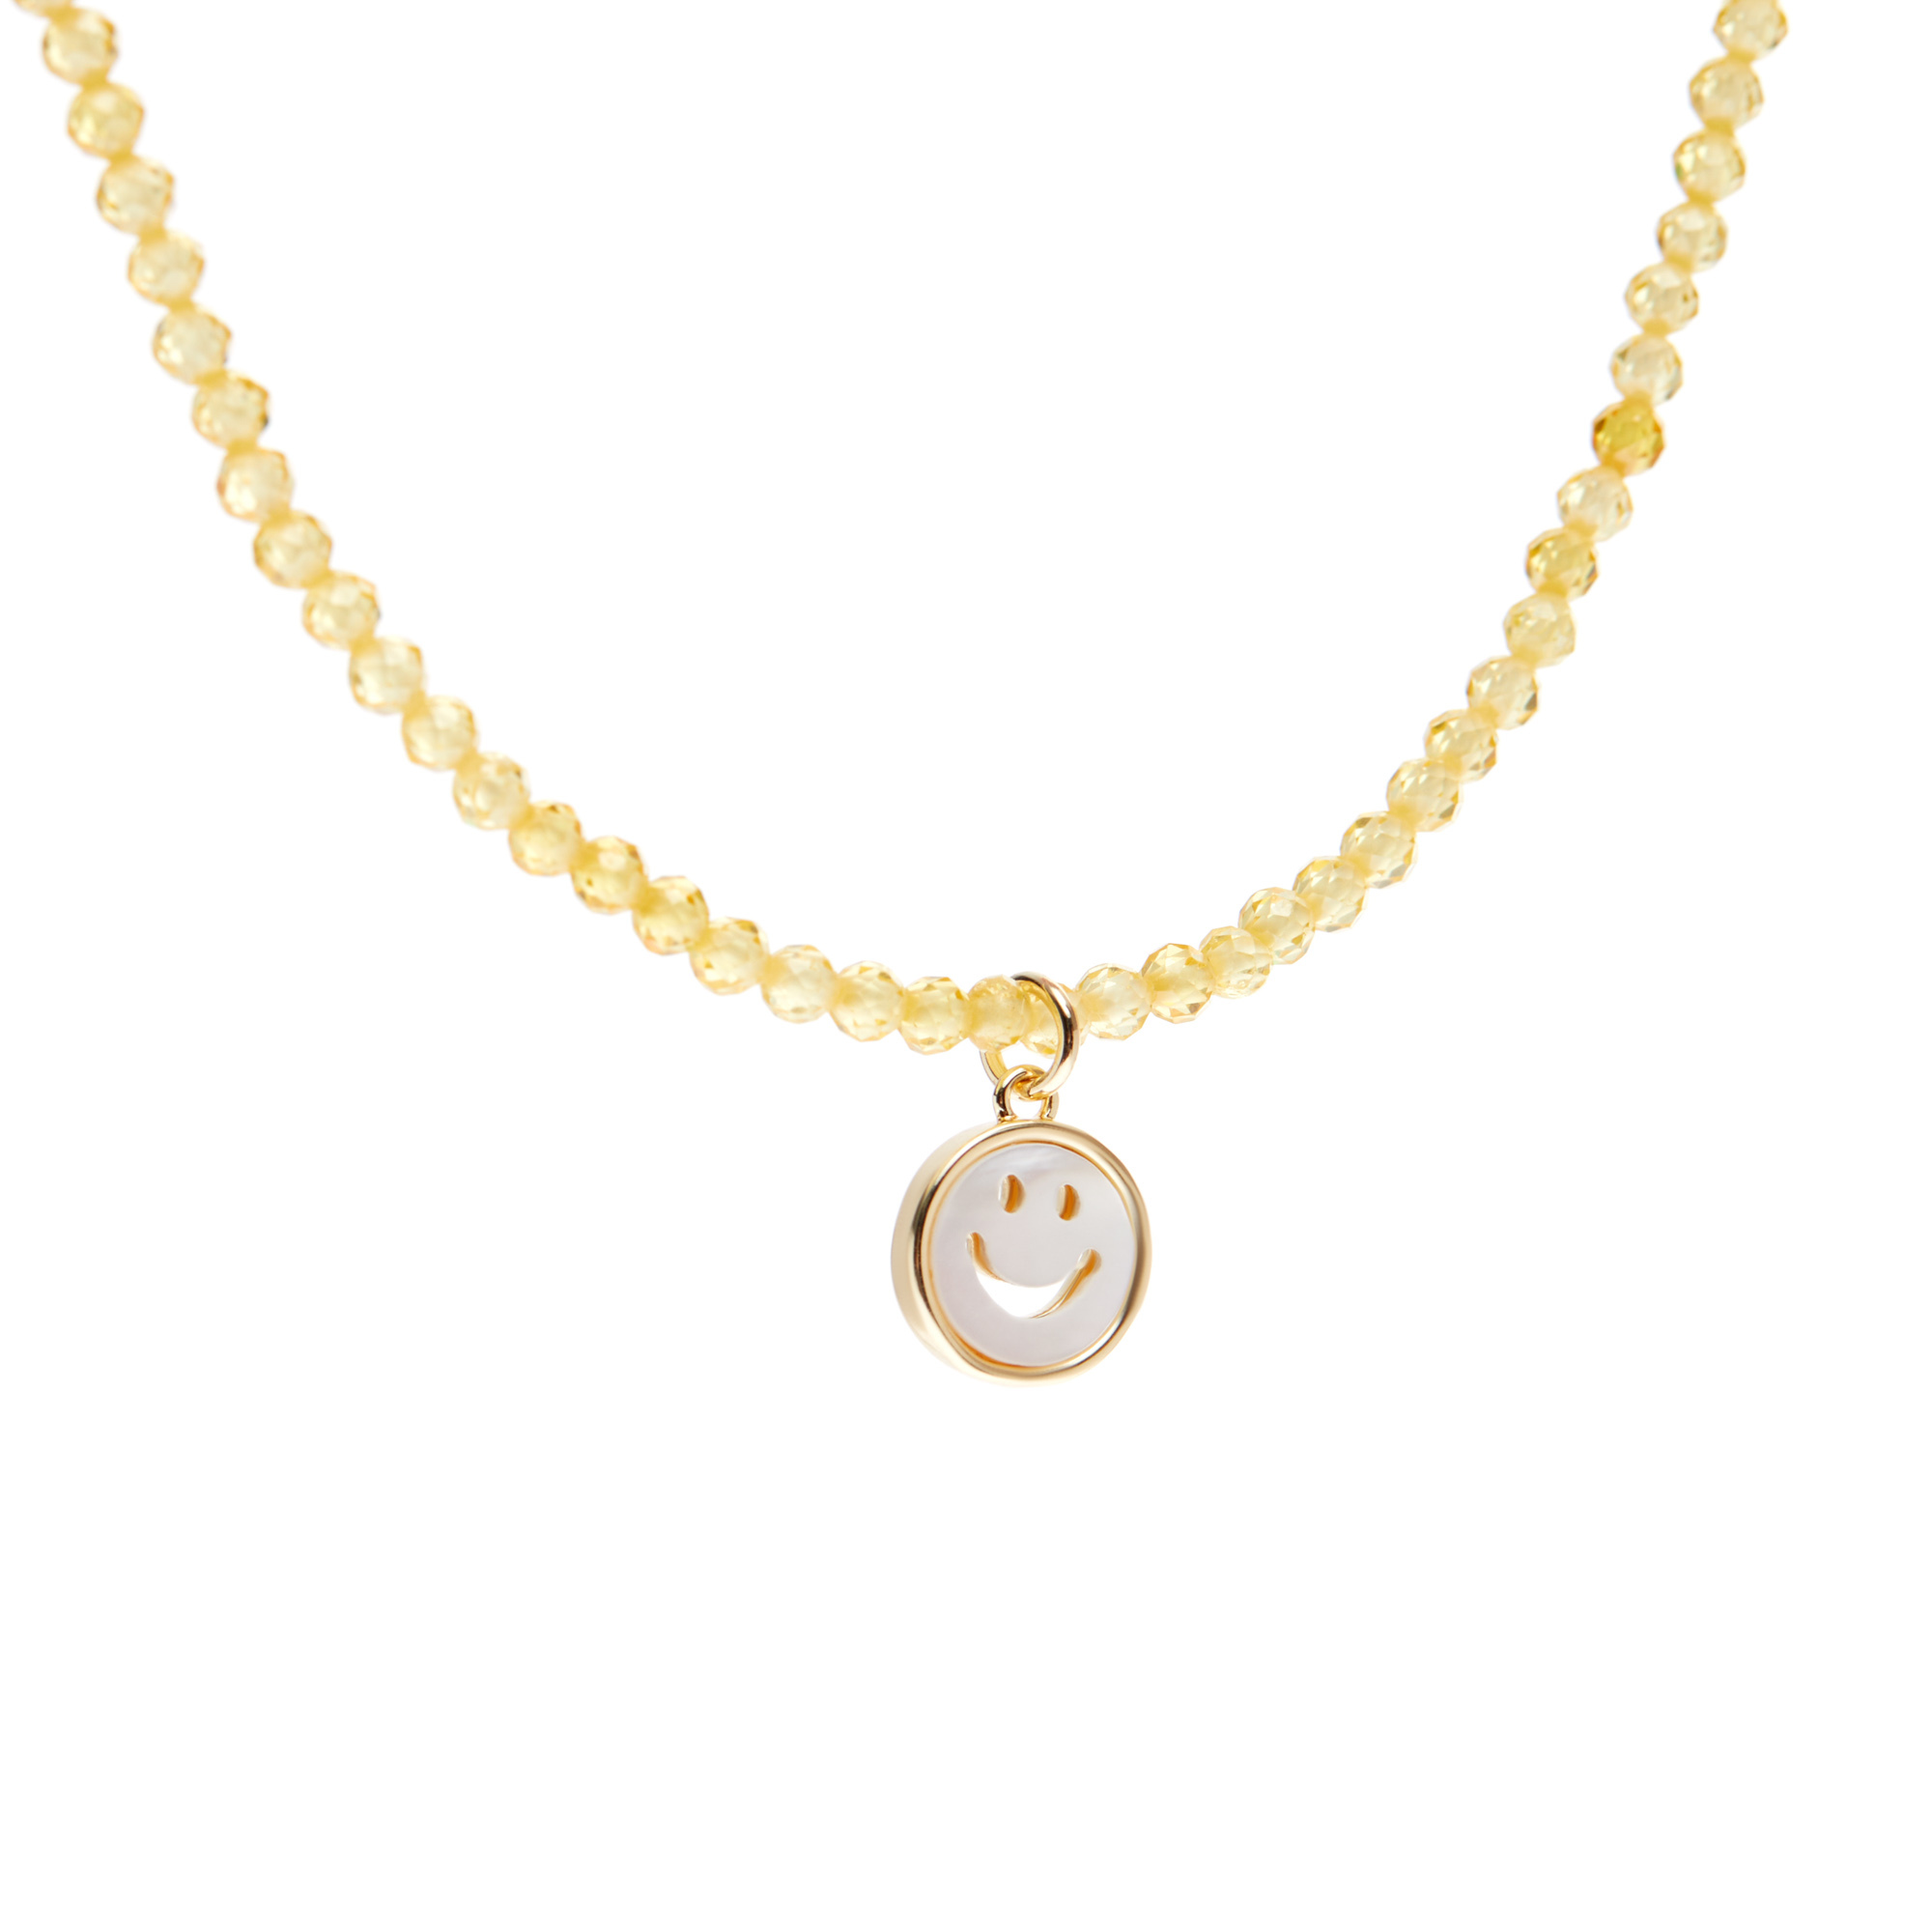 HOLLY JUNE Колье Sunny Smile Necklace колье holly june moon smile necklace 1 шт